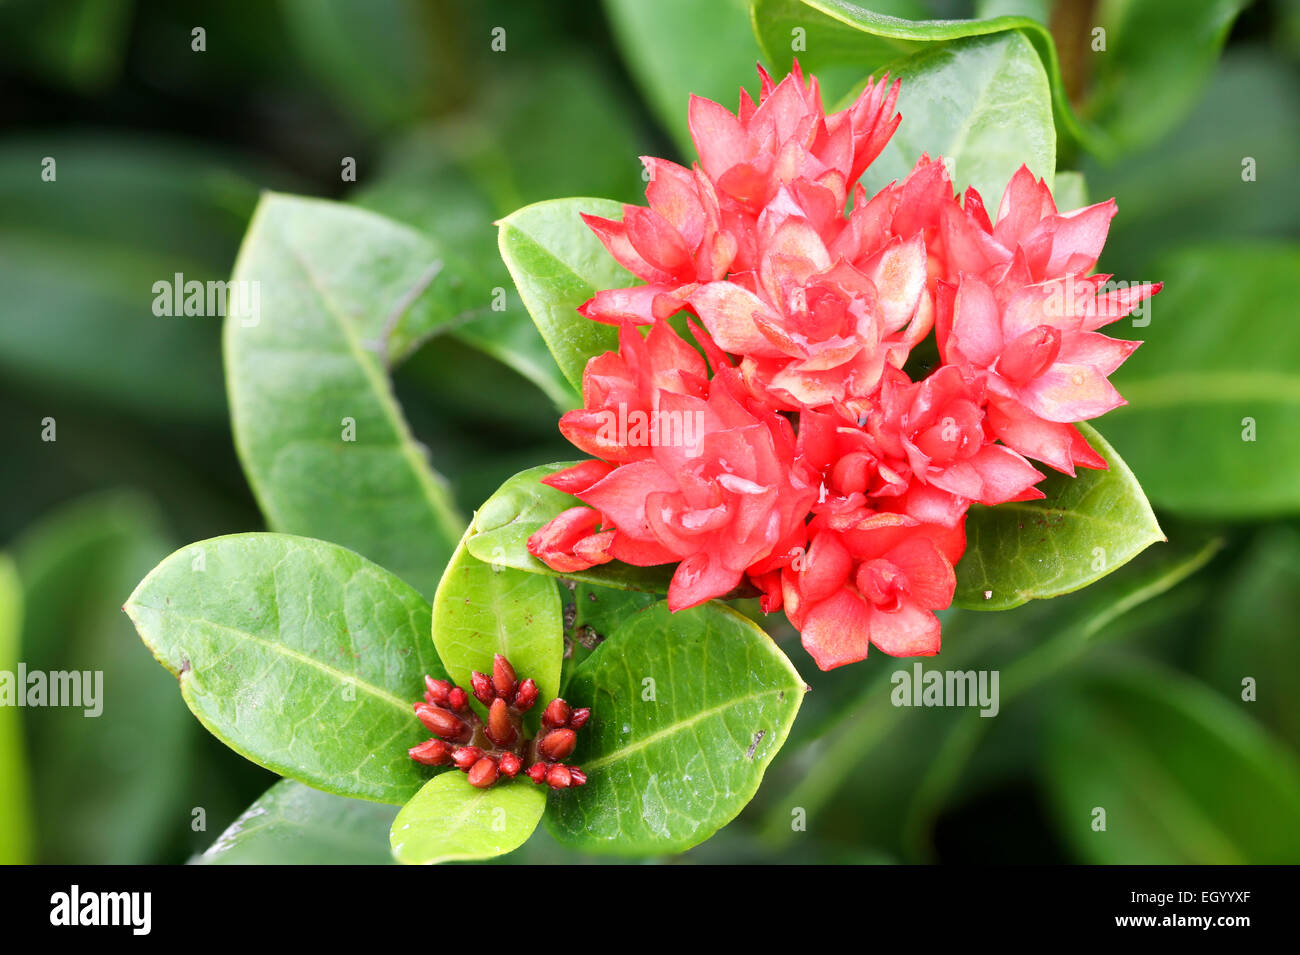 Close up ixoras, lovely small tiny red flowers in groups with natural environment outdoor under sunlight Stock Photo